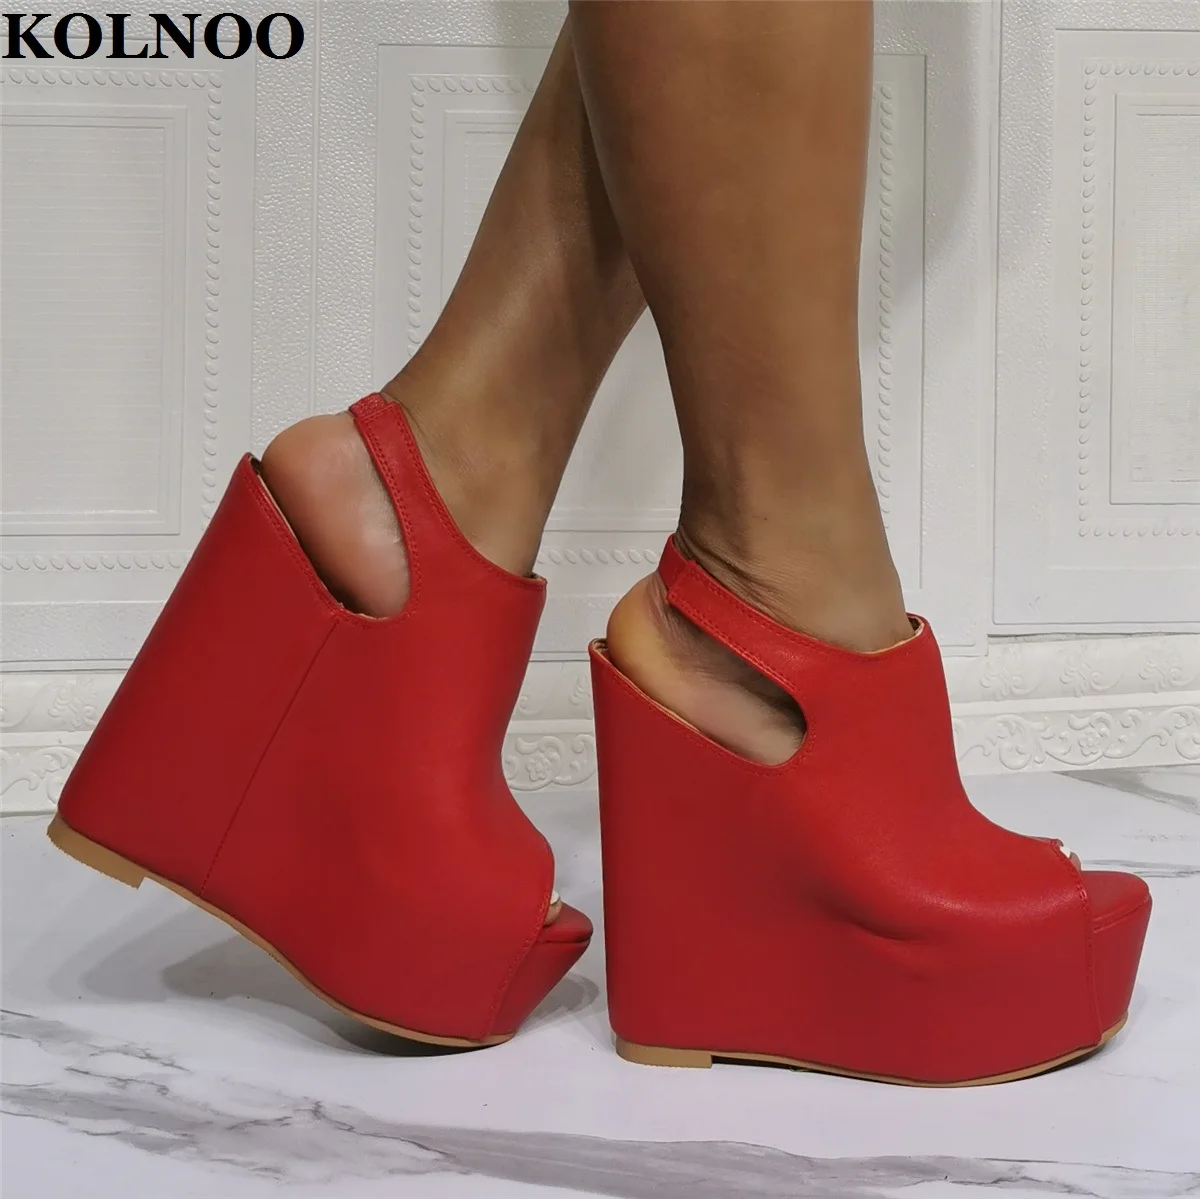 

KOLNOO Handmade Real-Photos Womens Wedges Heeled Sandals Peep-Toe Red Faux-Leather Silngback Sexy Evening Party Fashion Shoes